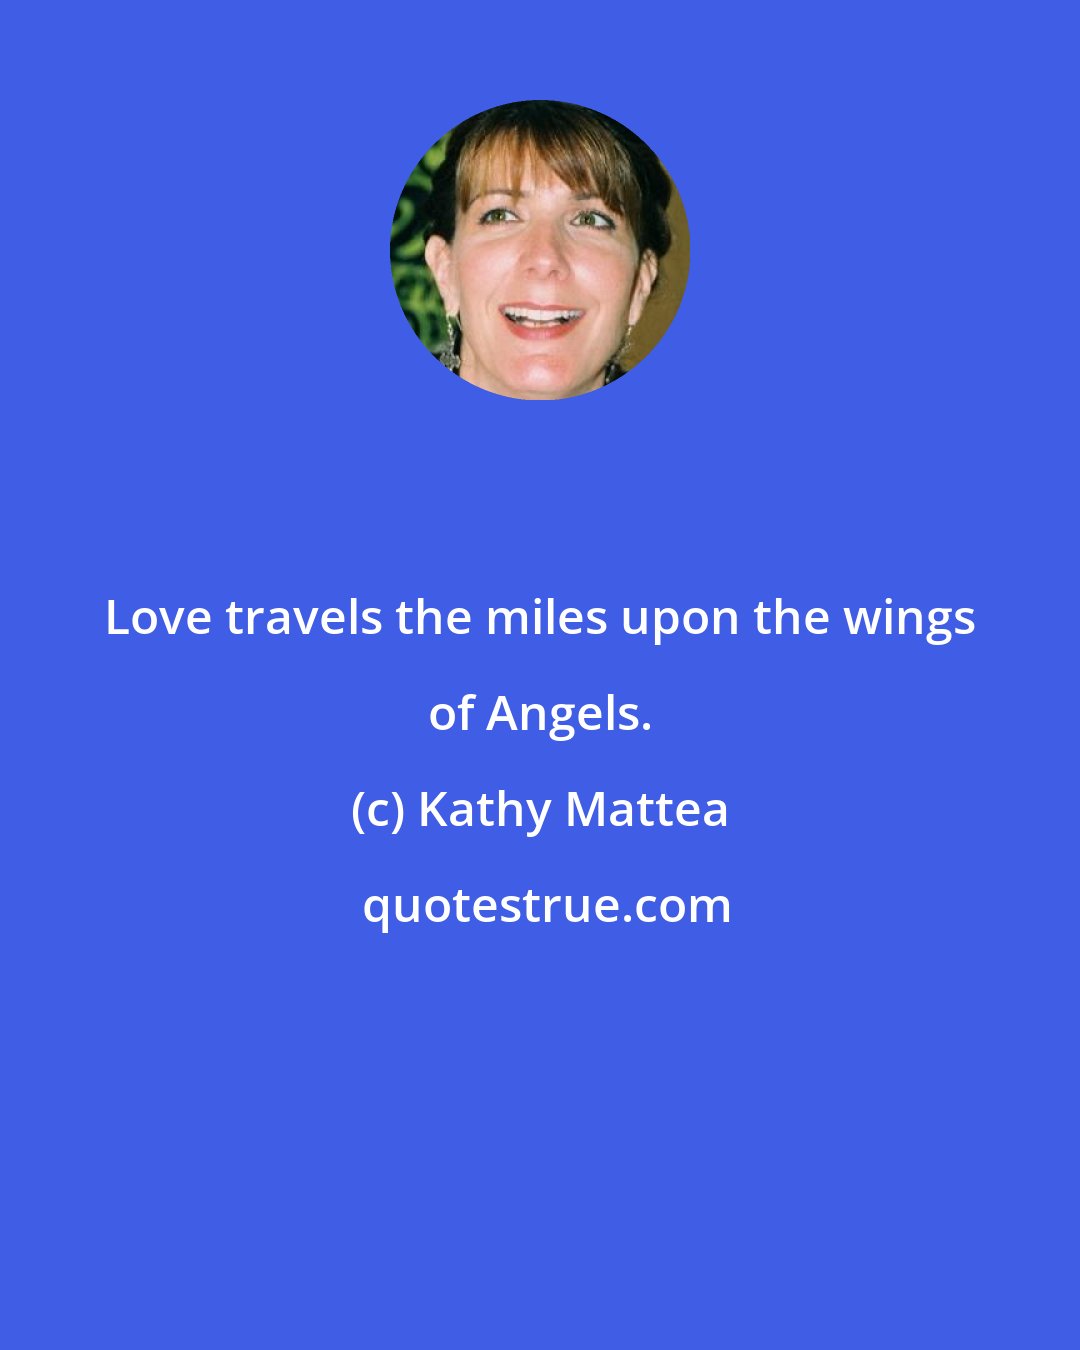 Kathy Mattea: Love travels the miles upon the wings of Angels.